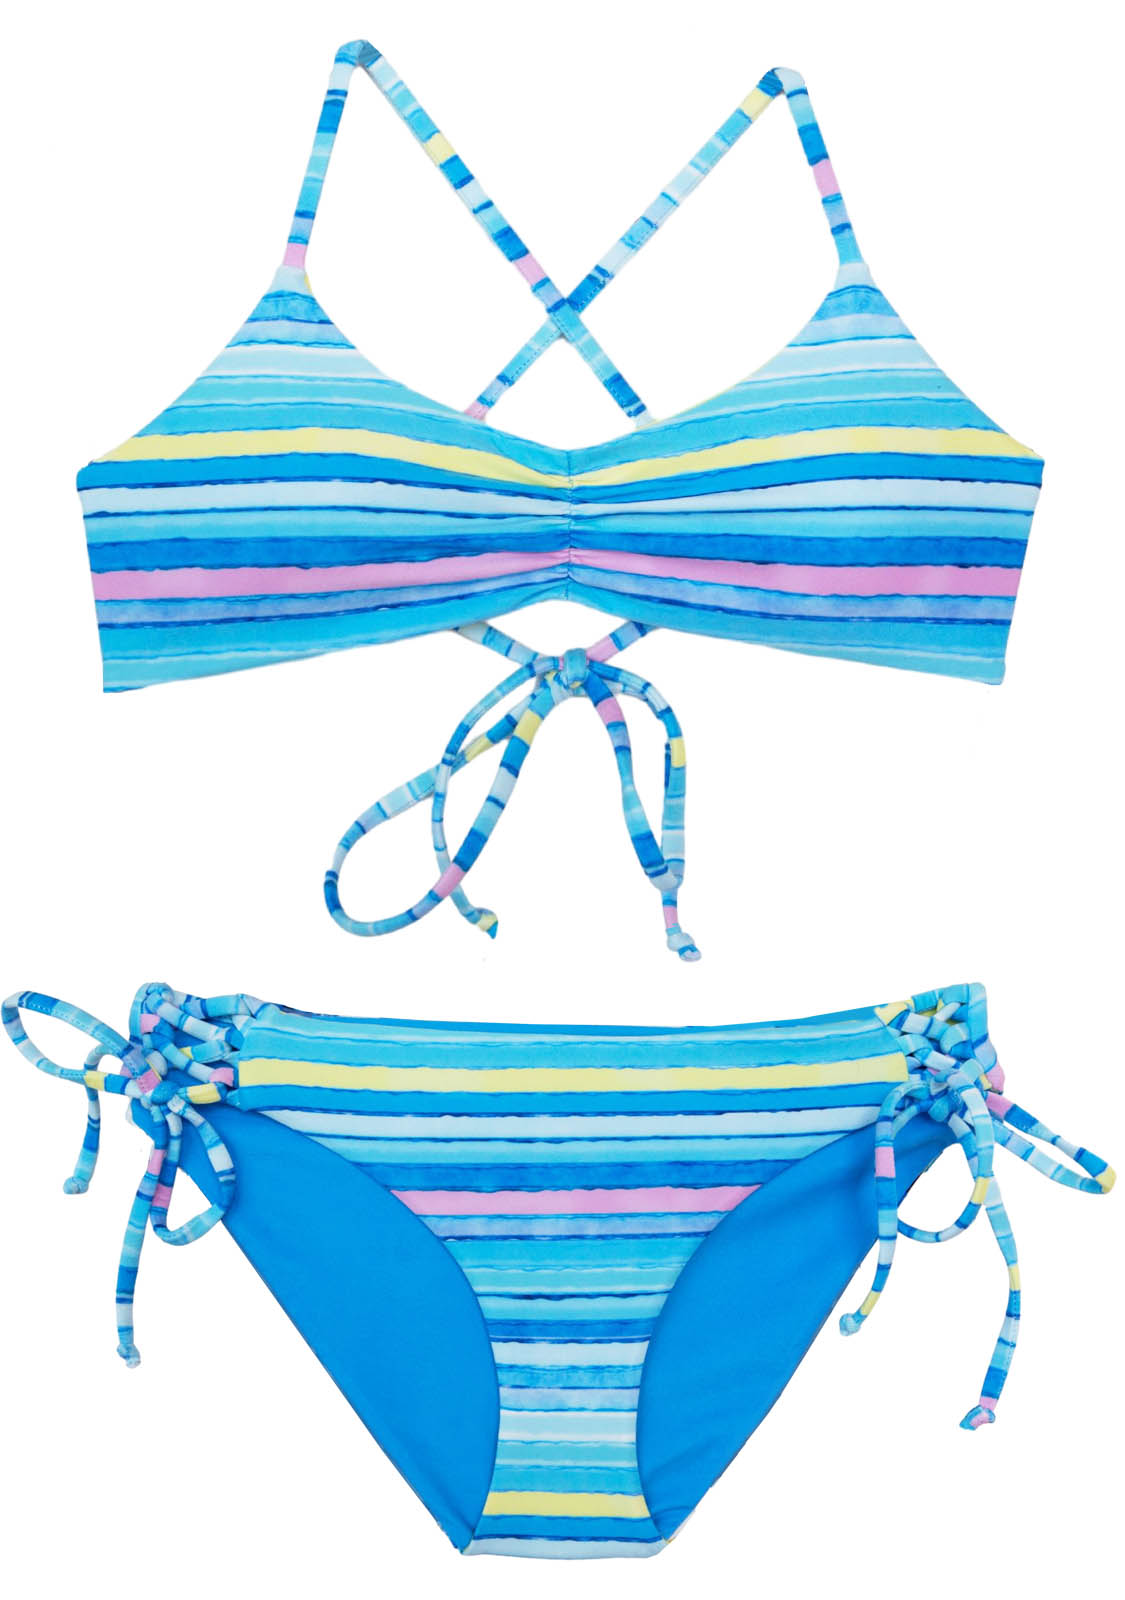 Padded and Full coverage Swimwear for Girls ages 12, 14 and 16 with pastel color stripes by teen brand Chance Loves